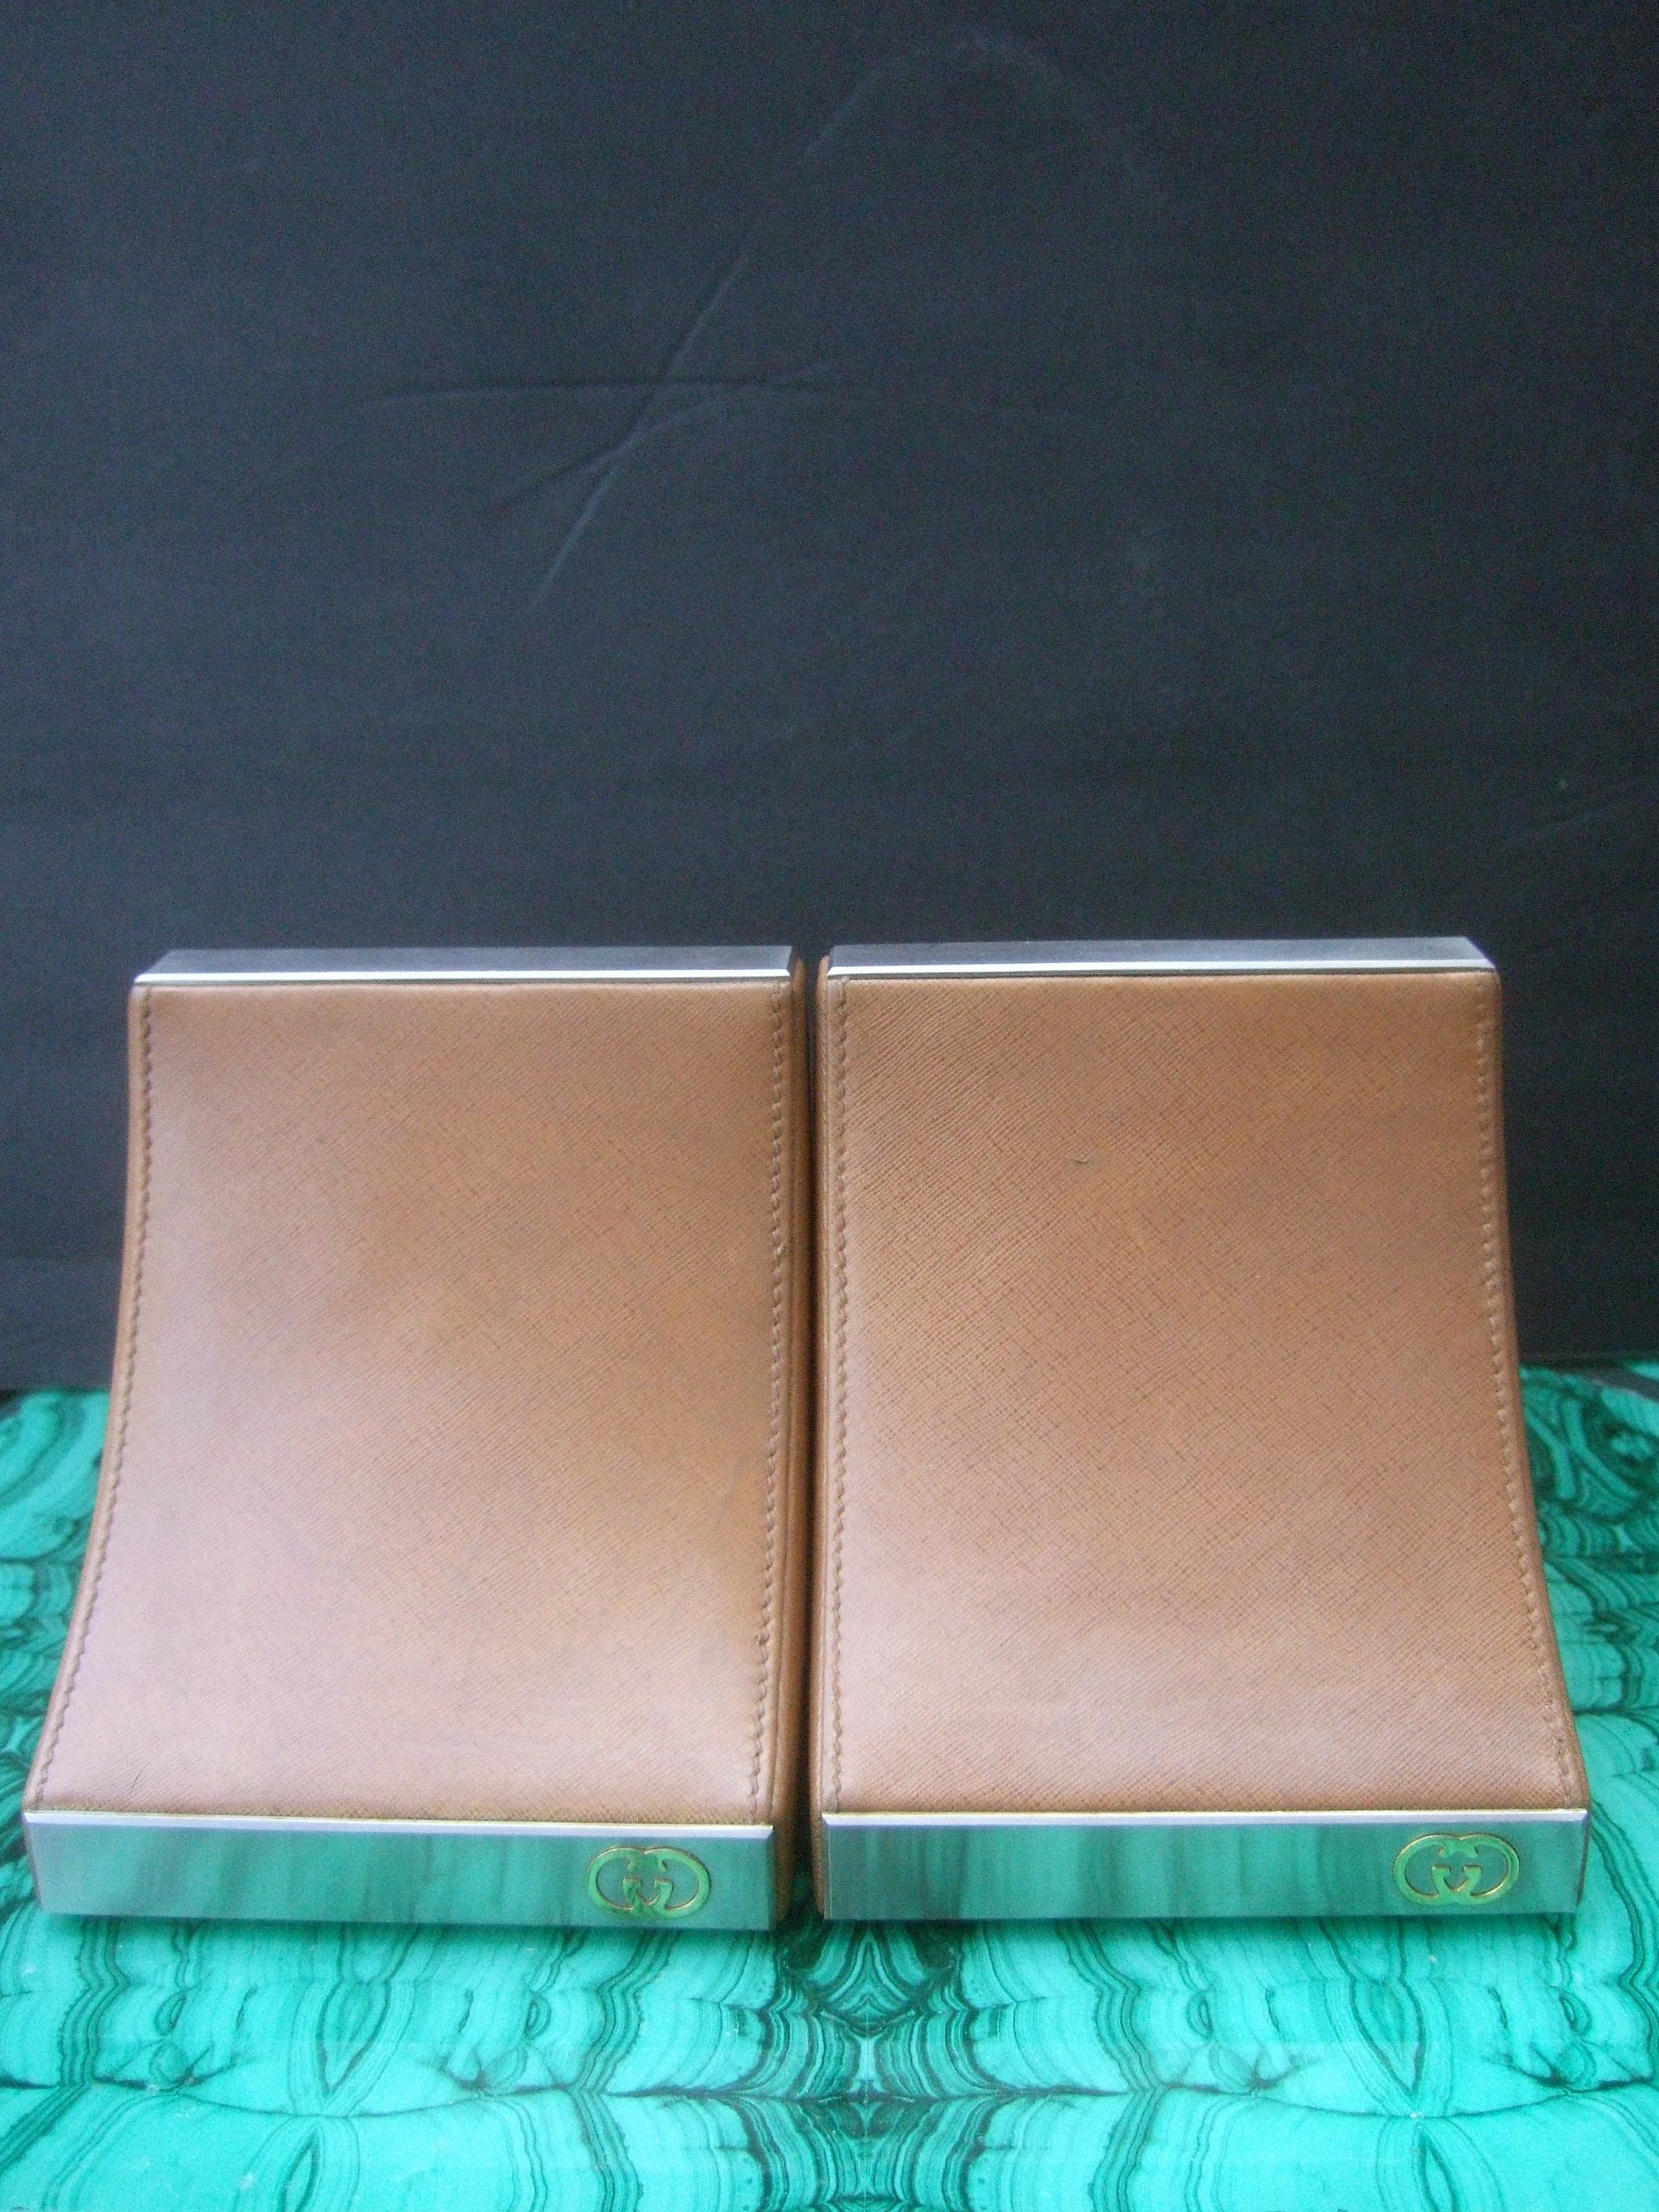 Gucci Italy Rare caramel brown leather pair of bookends c 1970s
The elegant pair of bookends are covered with smooth light brown leather
The front exterior base is designed with a rectangular silver metal plate 
with Gucci's understated interlocked